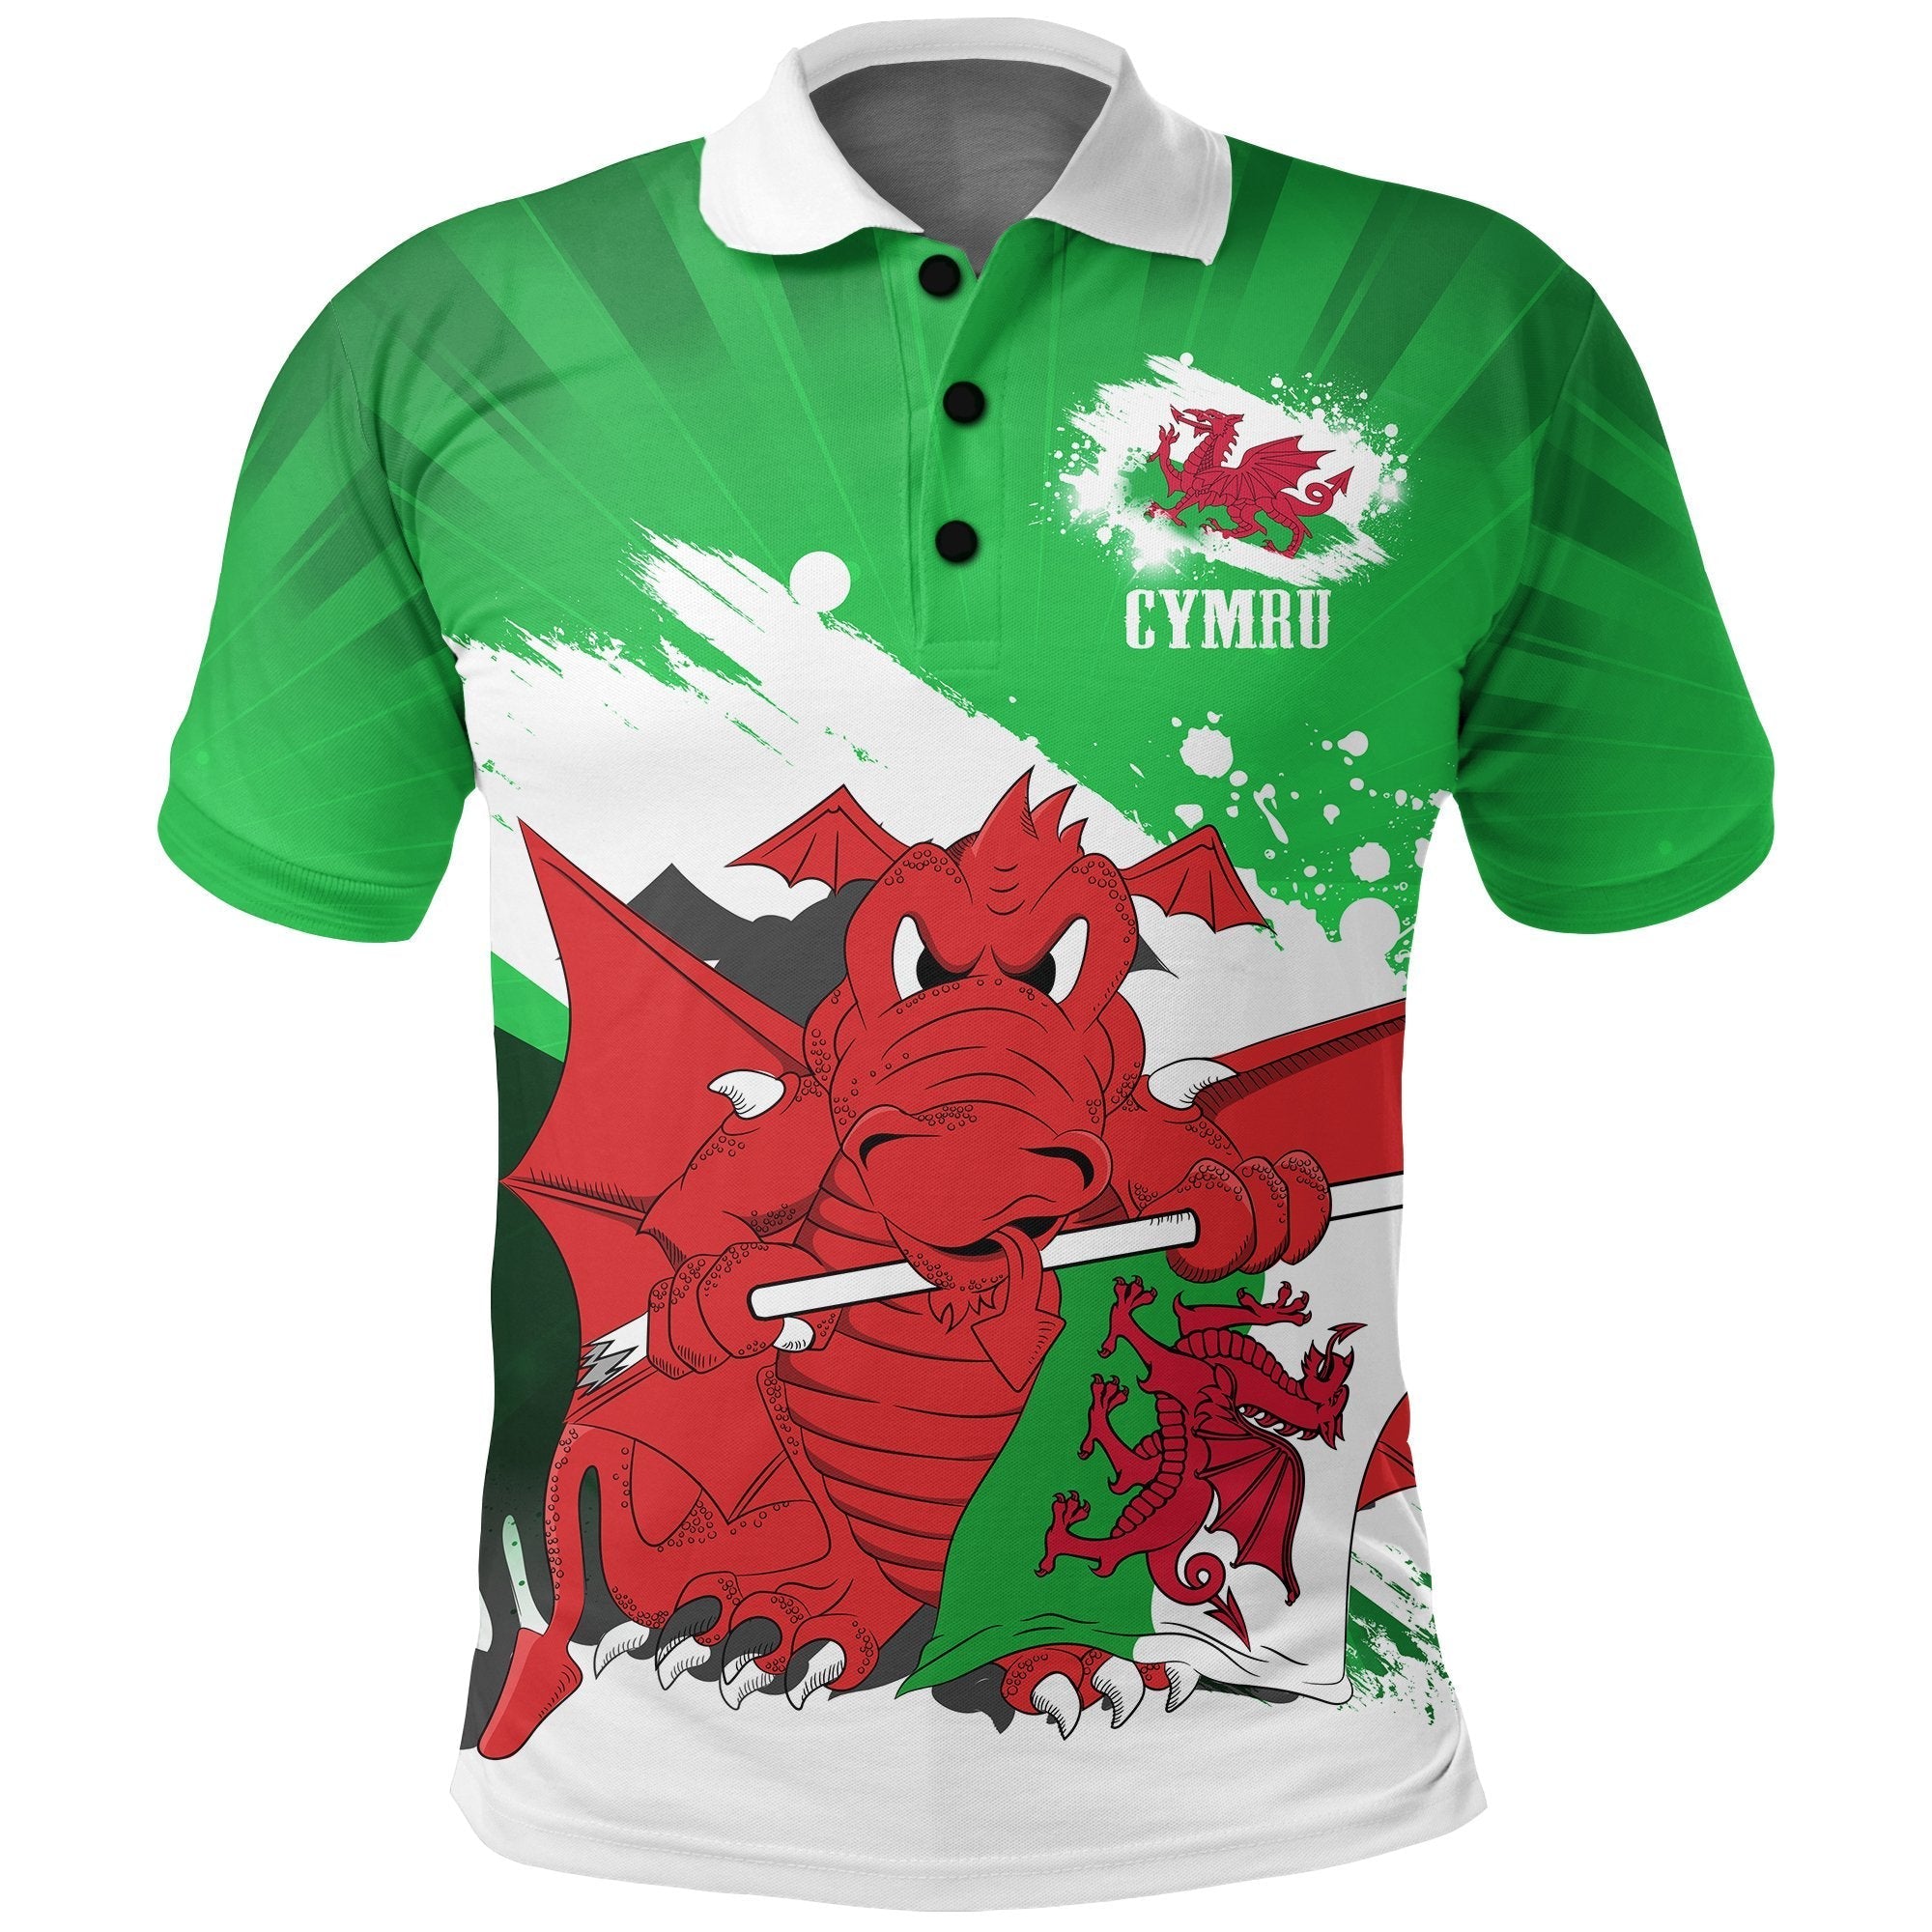 wales-polo-shirt-art-painting-style